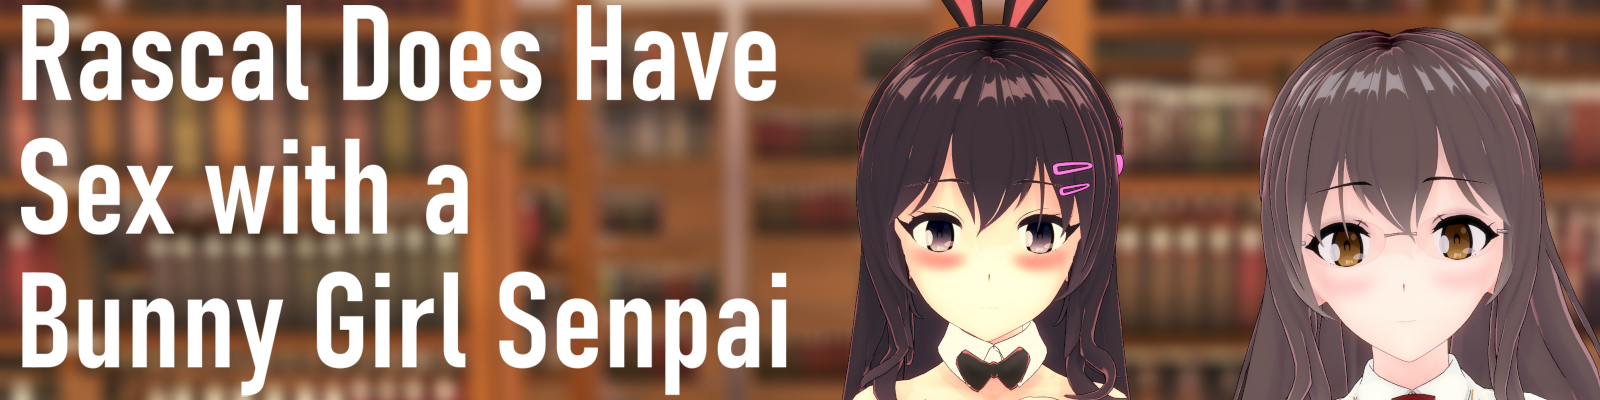 Rascal Does Have Sex with a Bunny Girl Senpai